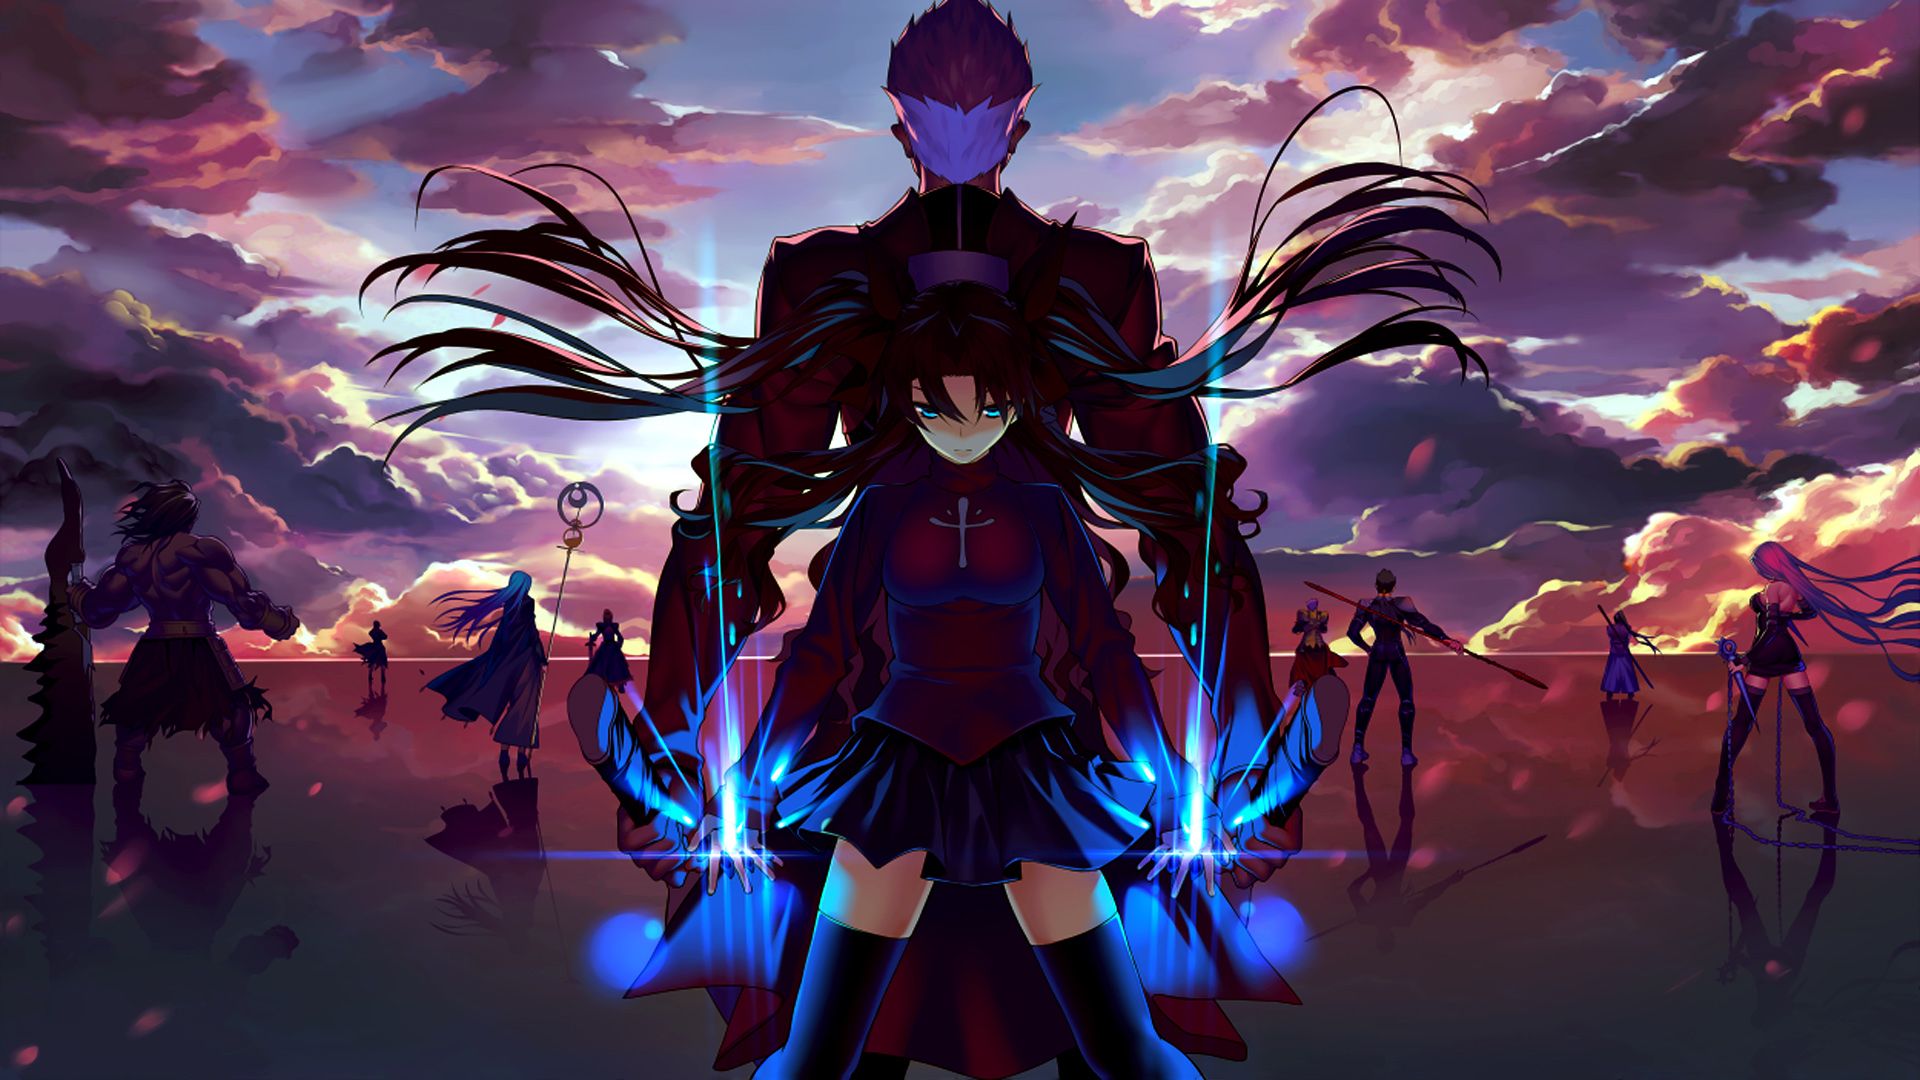 Fate/stay night [Unlimited Blade Works] background